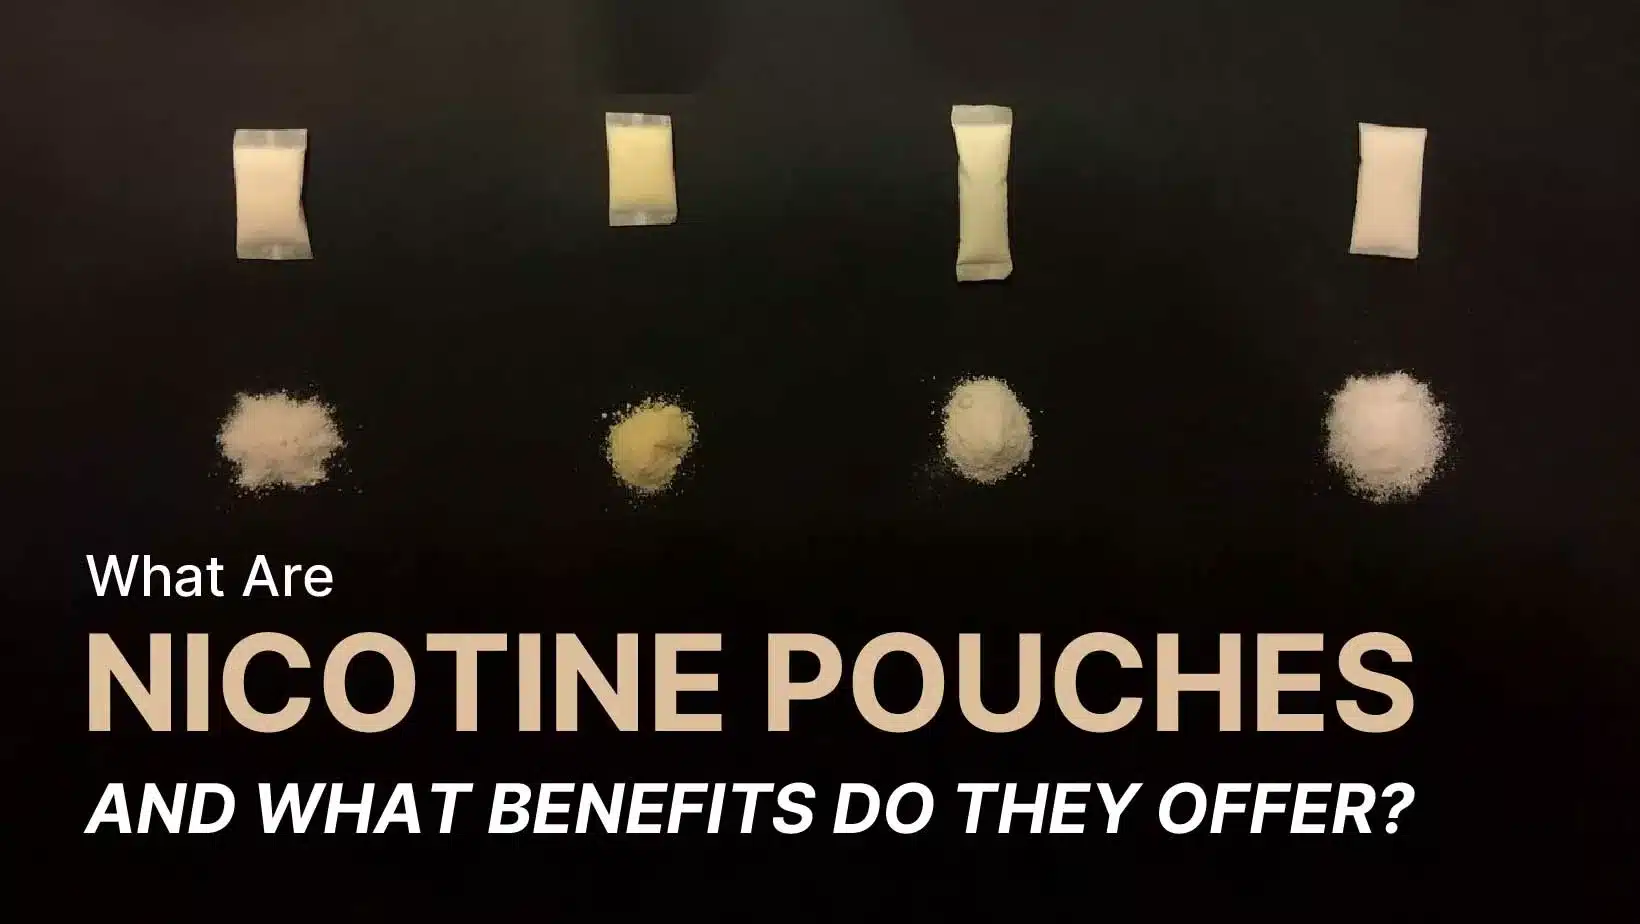 What Are Nicotine Pouches And What Benefits Do They Offer